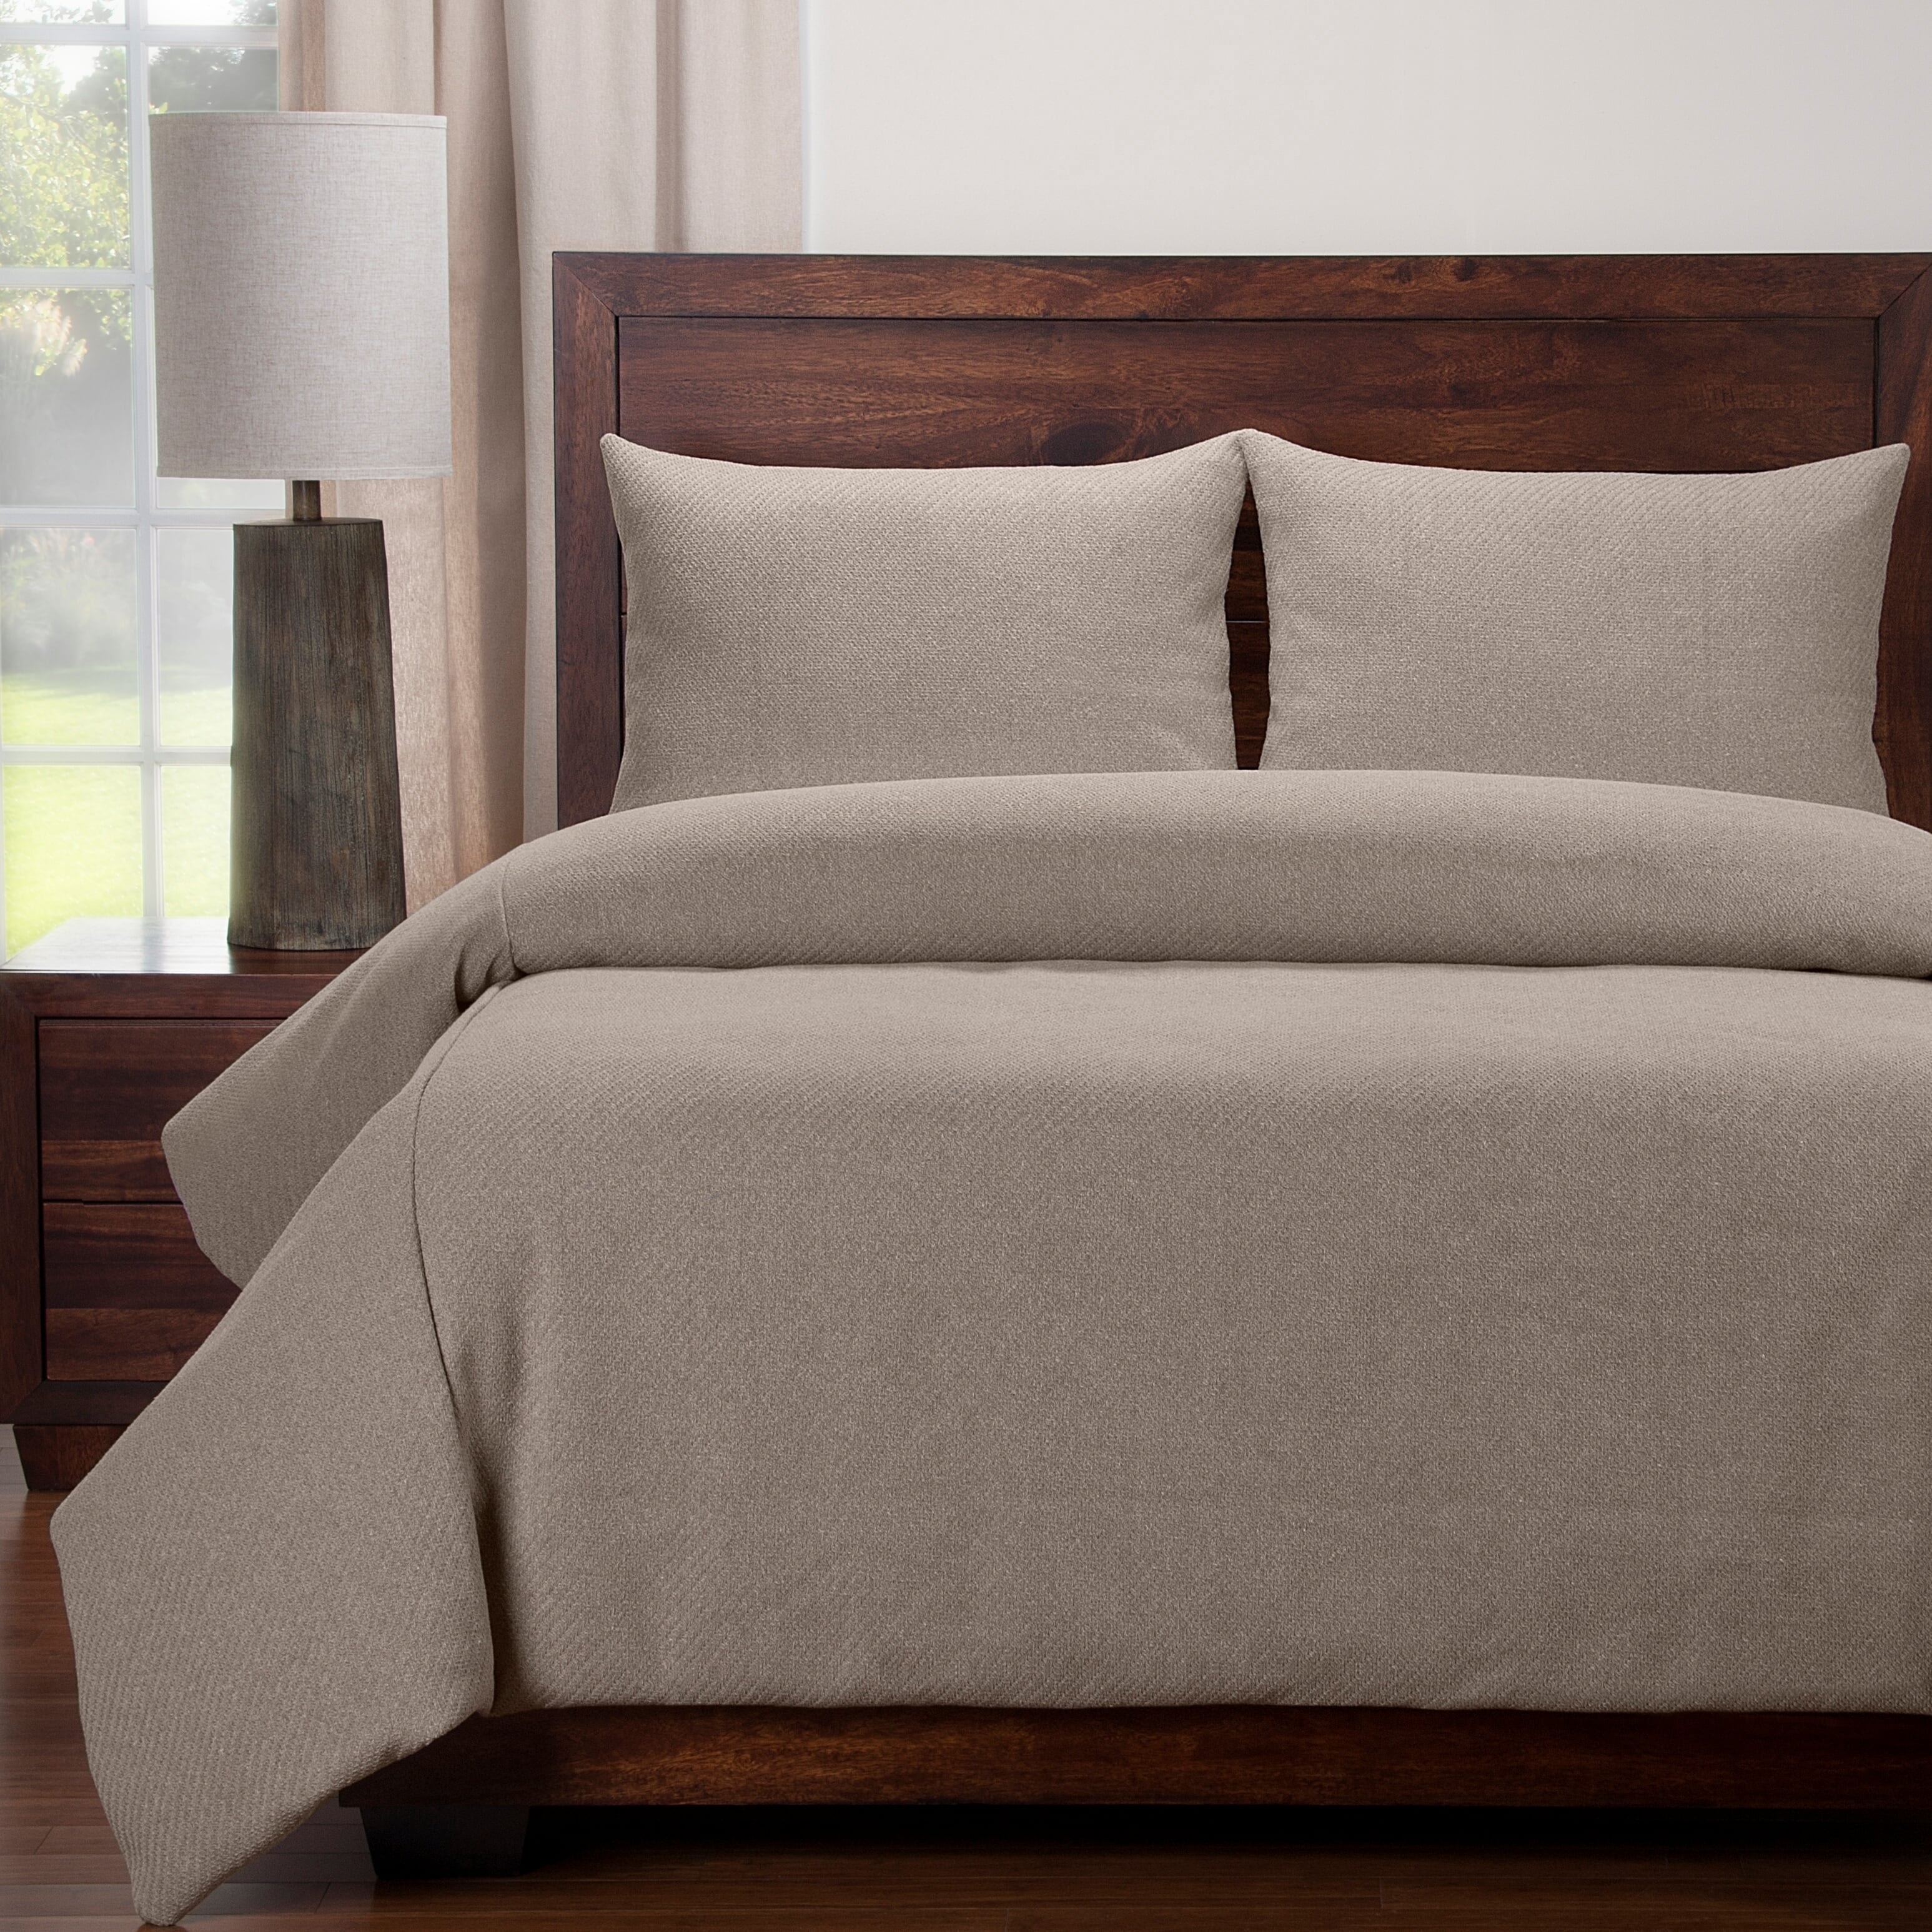 Shop Siscovers Earthy Textured Duvet And Shams Set On Sale